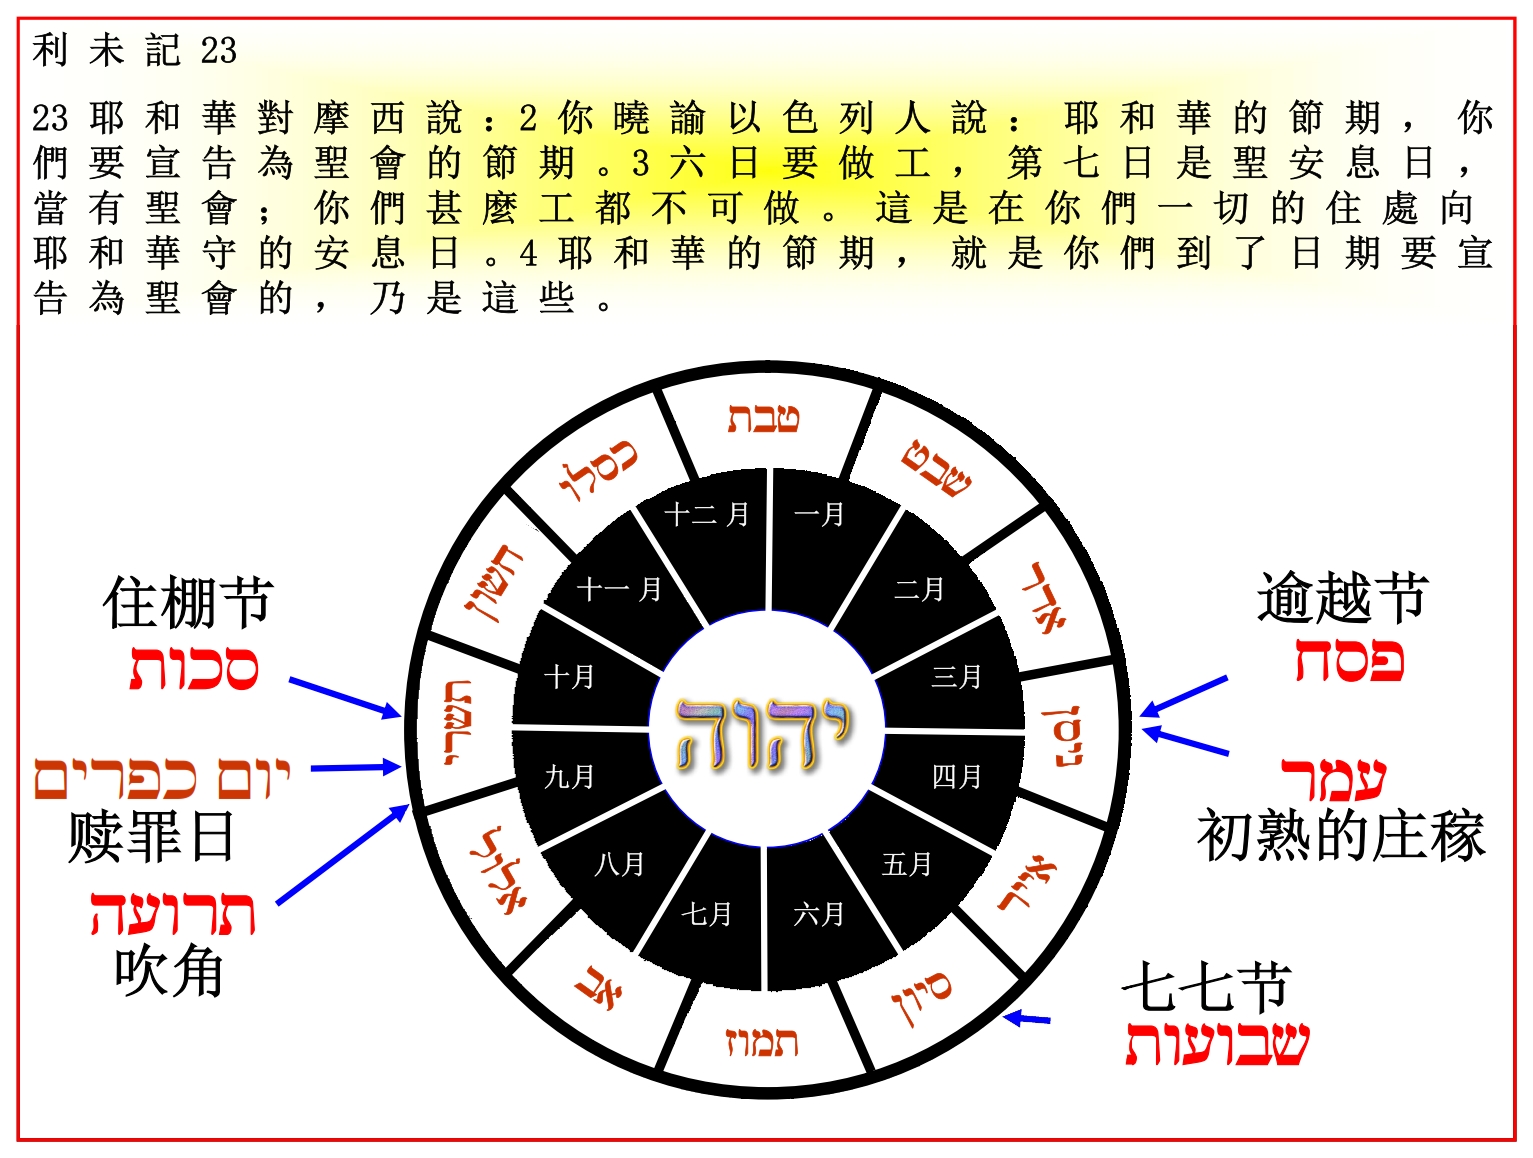 Jewish calendar showing dates for the Feasts of the Lord Chinese language Bible study